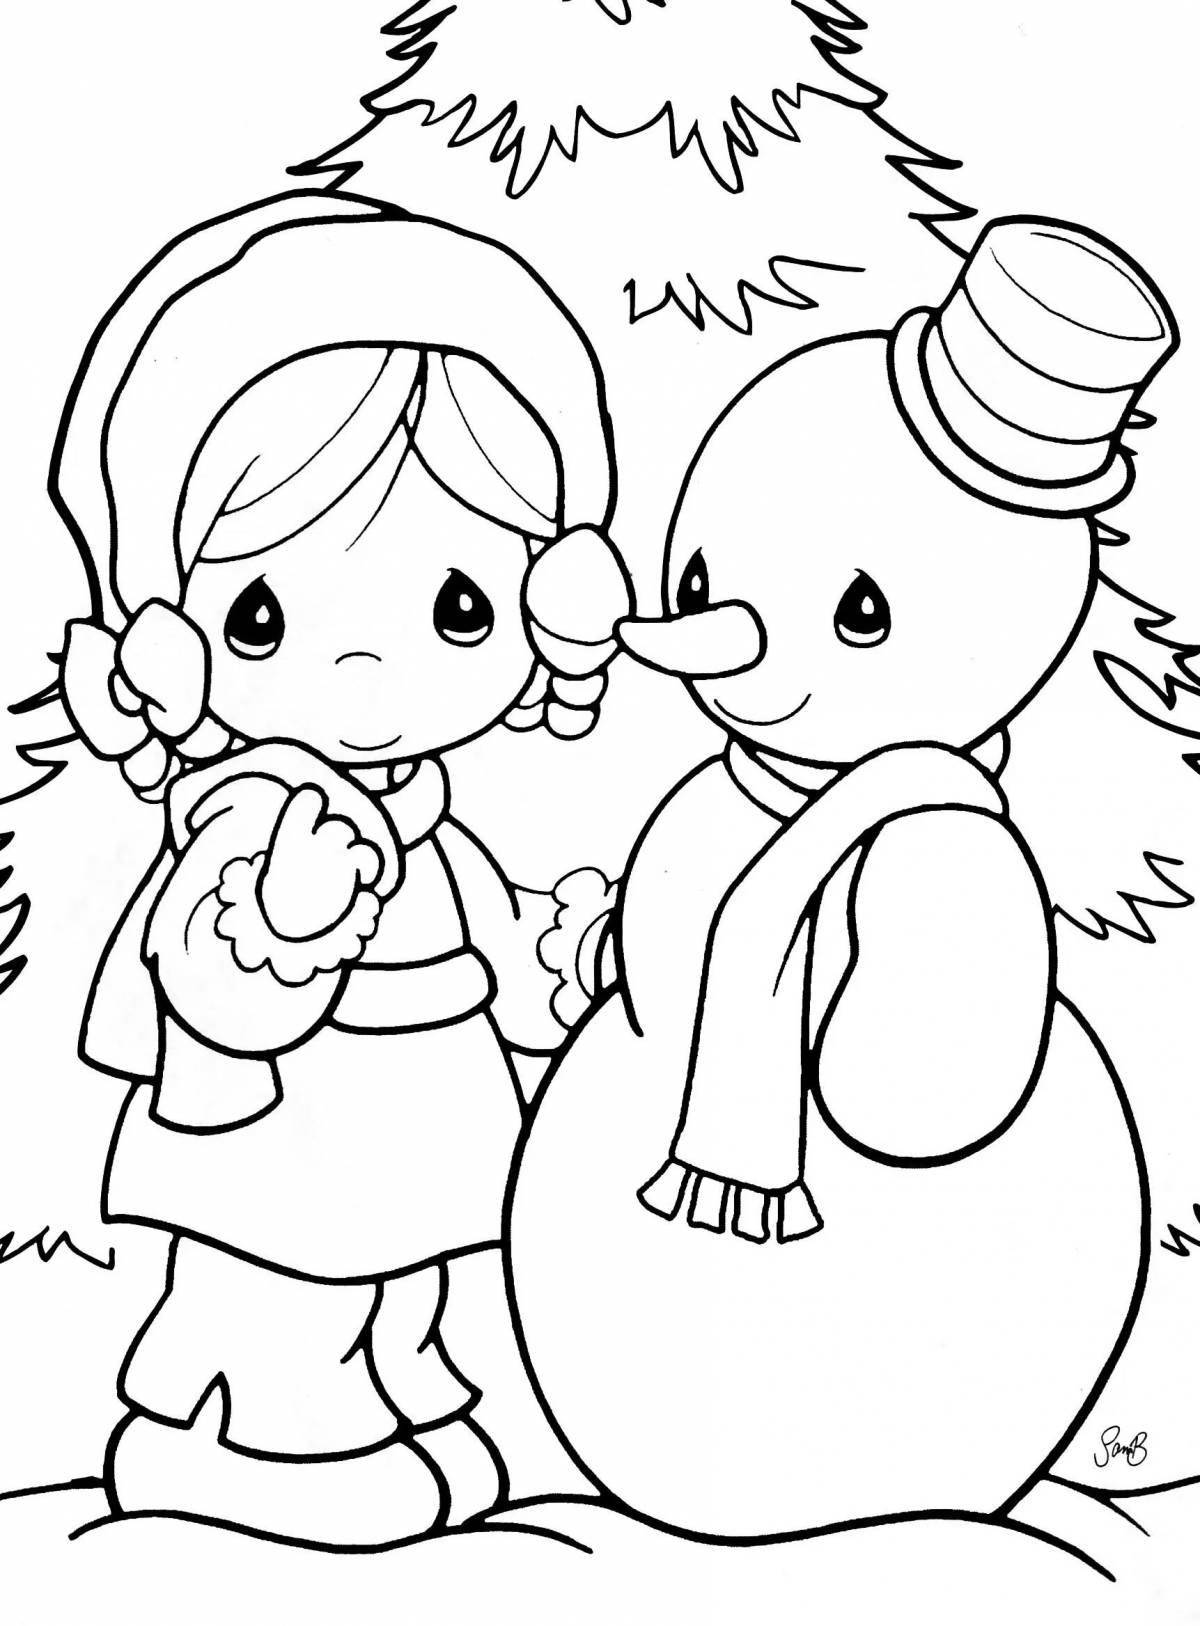 Glorious carol coloring pages for children 4-5 years old